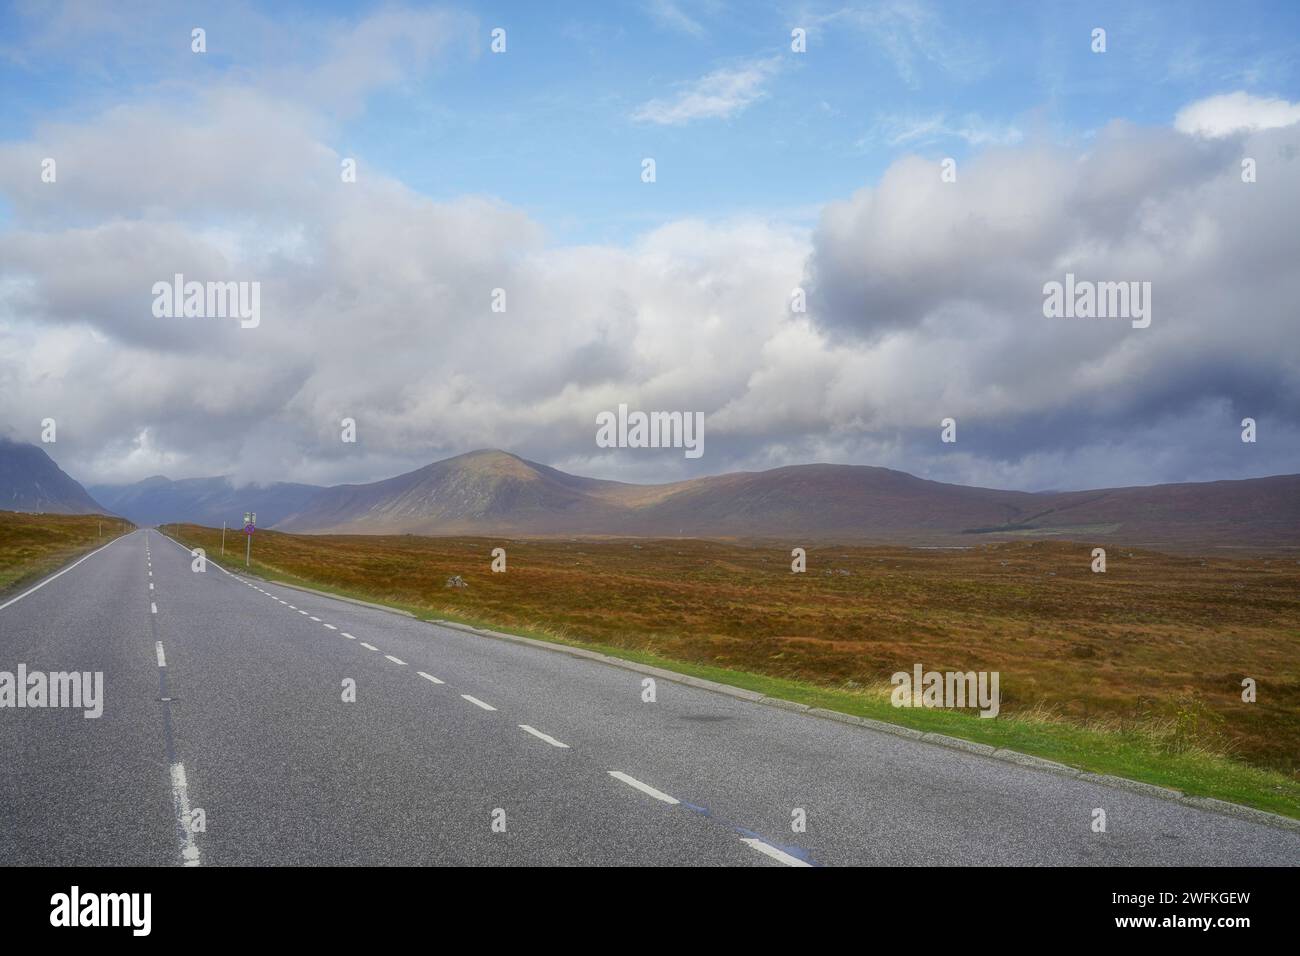 Just one of the many beautiful and scenic roads taking you through the Scottish Highlands in the early autumn. Stock Photo